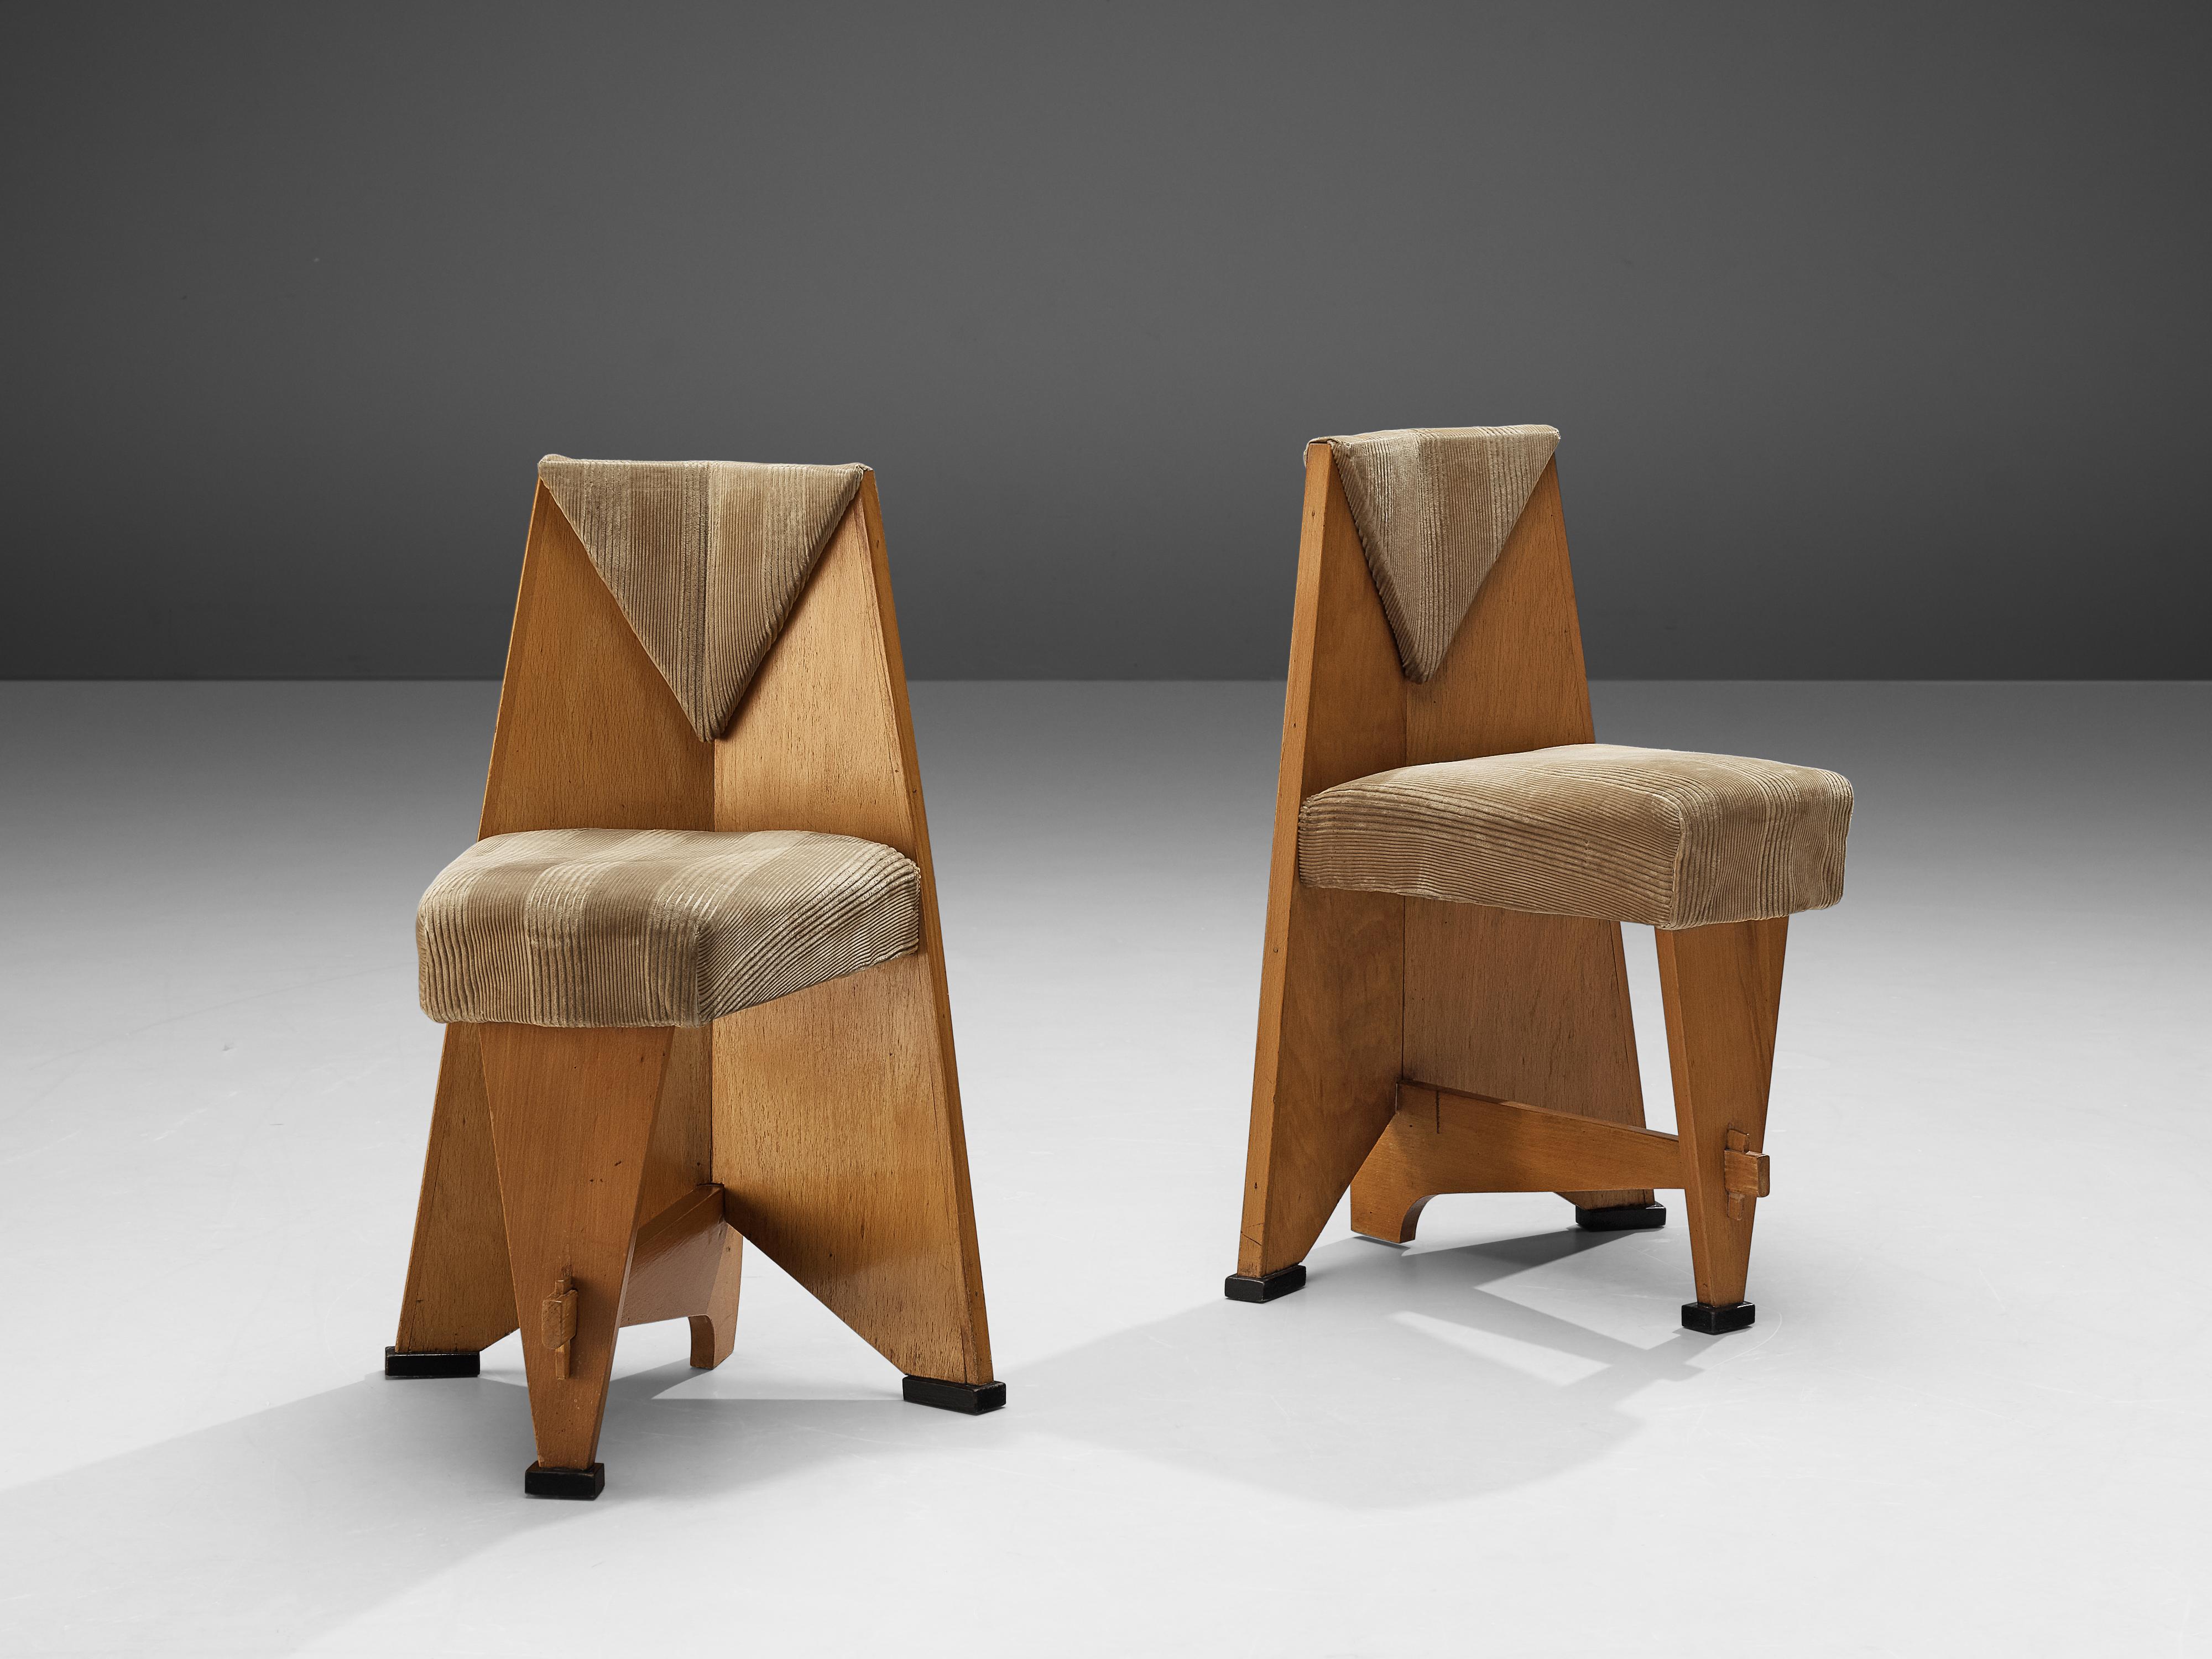 Laurens Groen for H.H. de Klerk & Zoonen, pair of side chairs, birch, soft yellow fabric upholstery, the Netherlands, 1924

These chairs by Dutch designer Laurens Groen have a striking, well-documented provenance. In the style of the Amsterdam